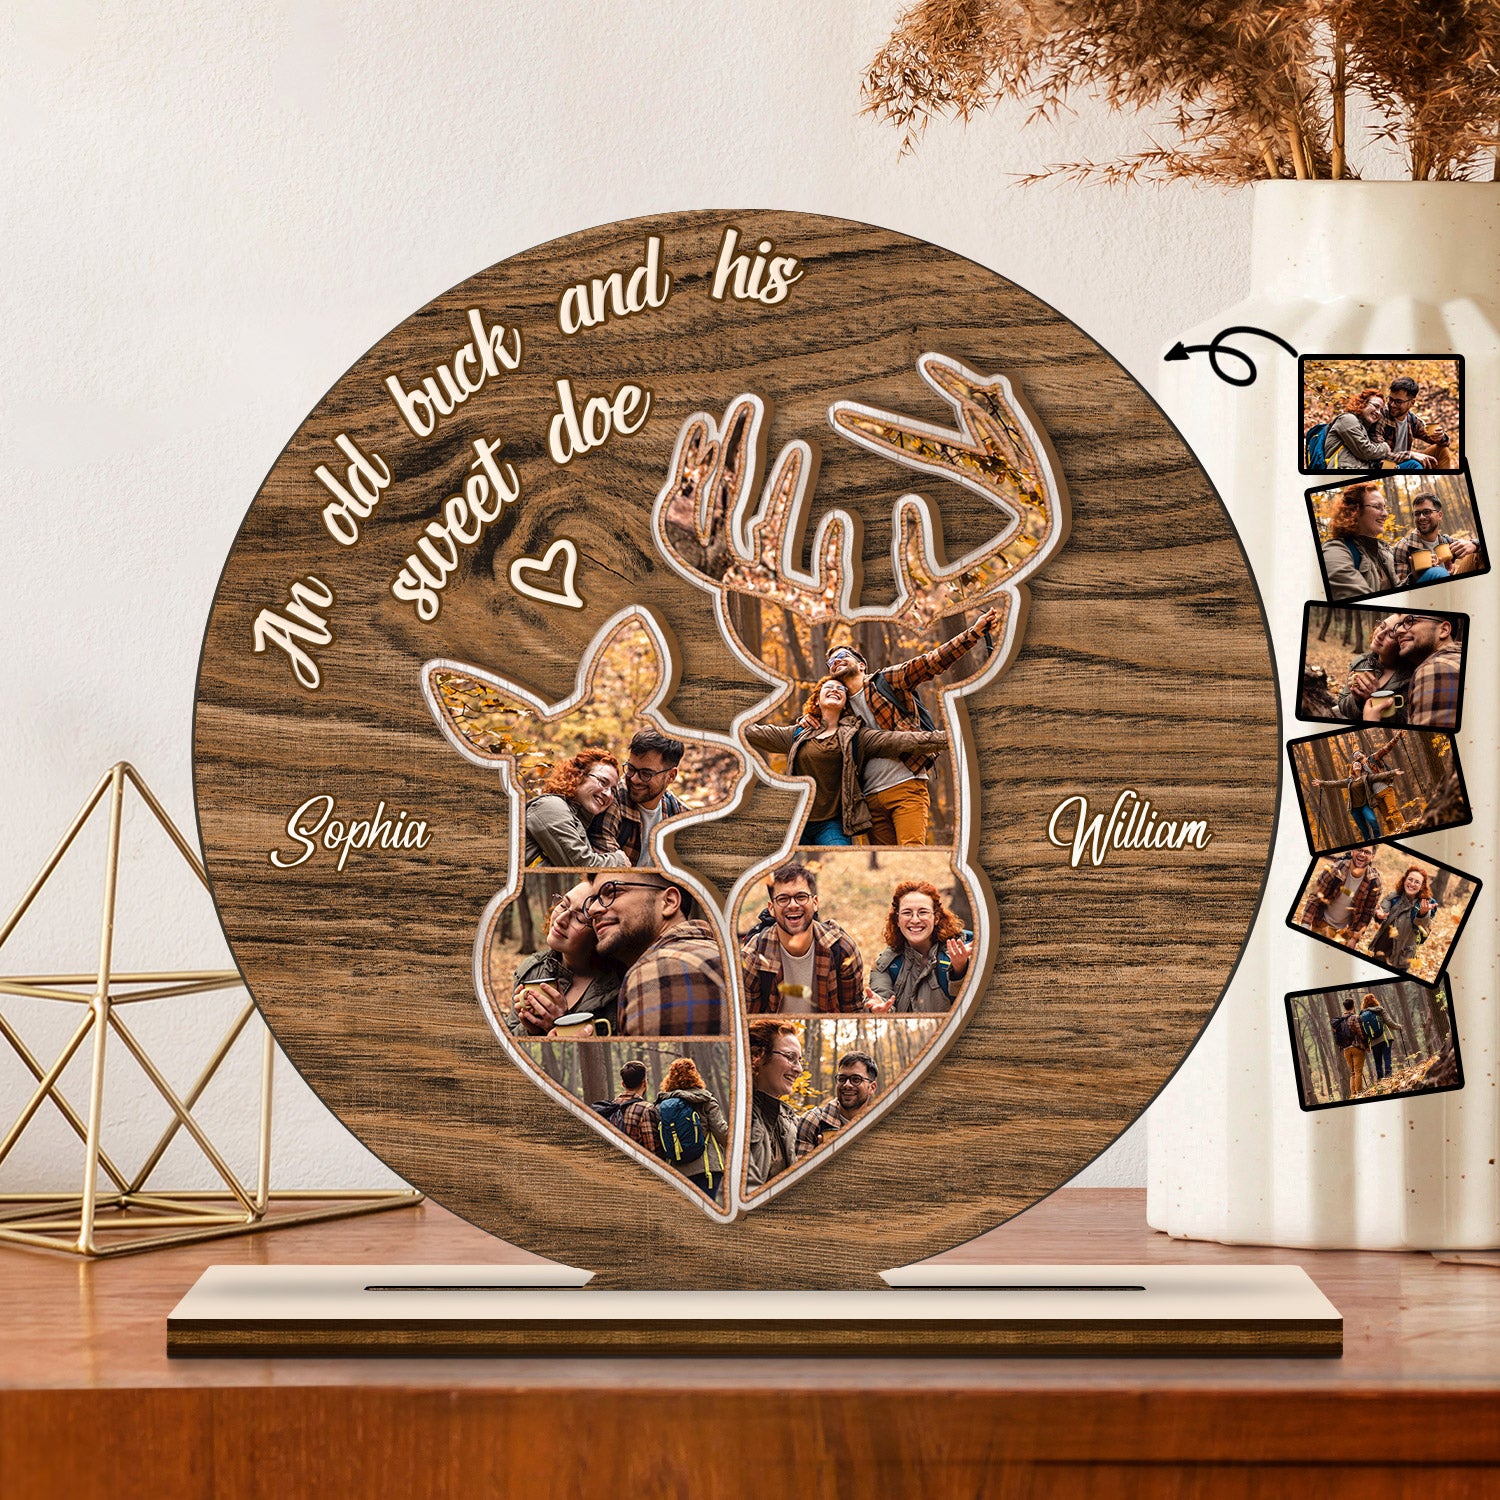 Custom Photo An Old Buck And His Sweet Doe - Birthday, Anniversary Gift For Spouse, Husband, Wife, Couple - Personalized Custom Shaped 2-Layered Wooden Plaque